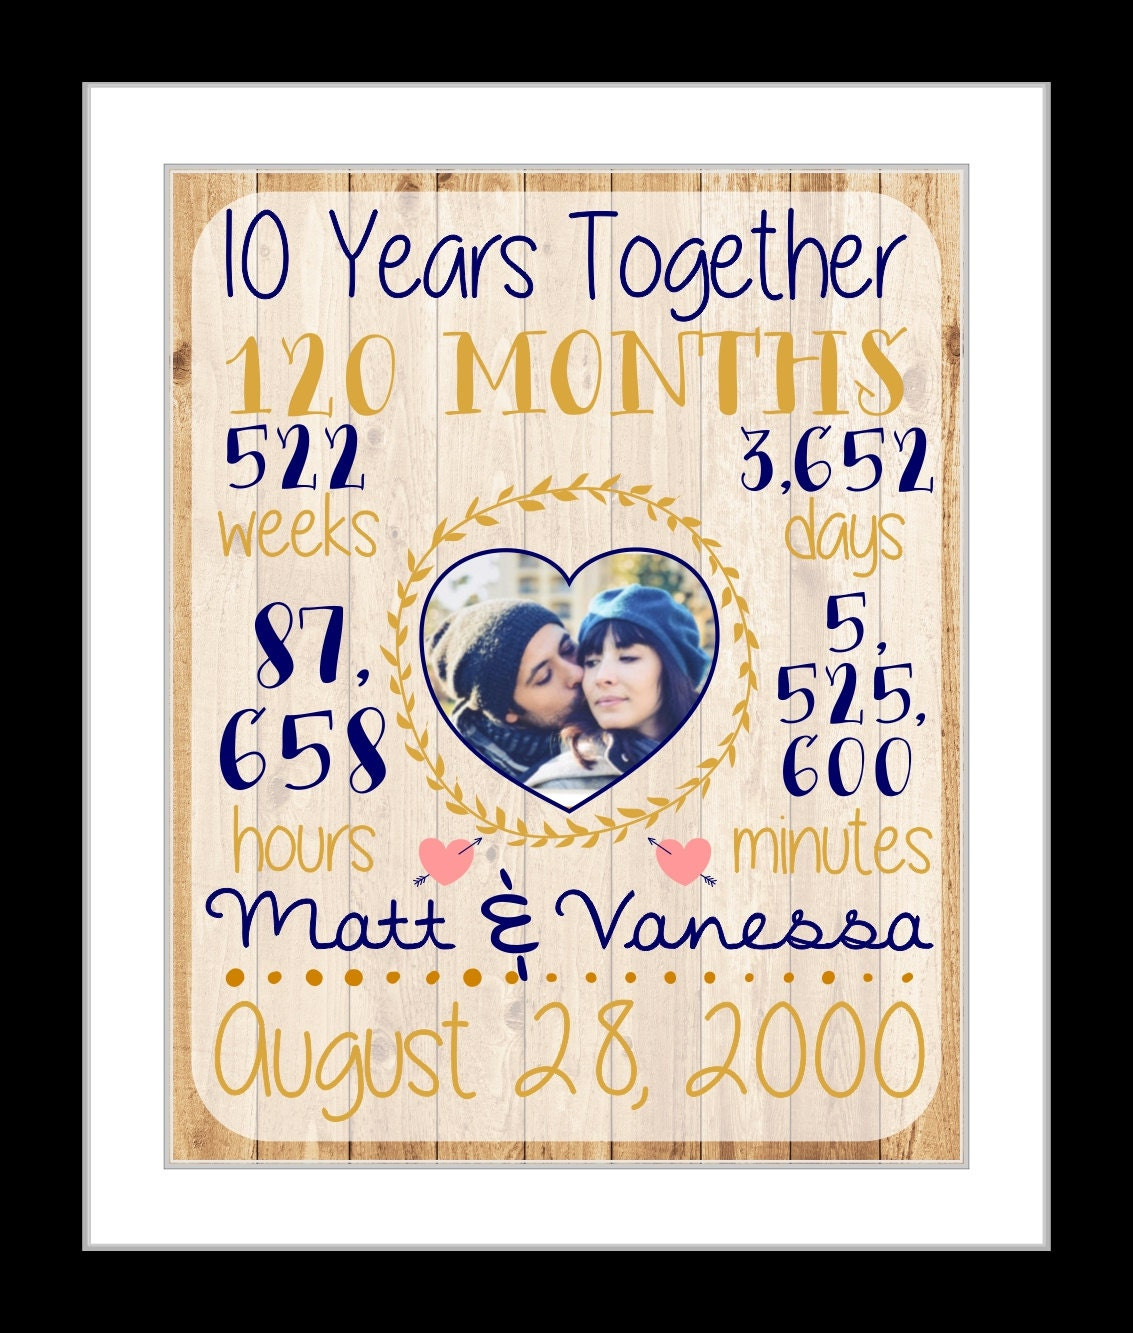 10 Year Anniversary Gift Ideas For Wife
 Gifts For 10 Year Anniversary For Wife 10 Year